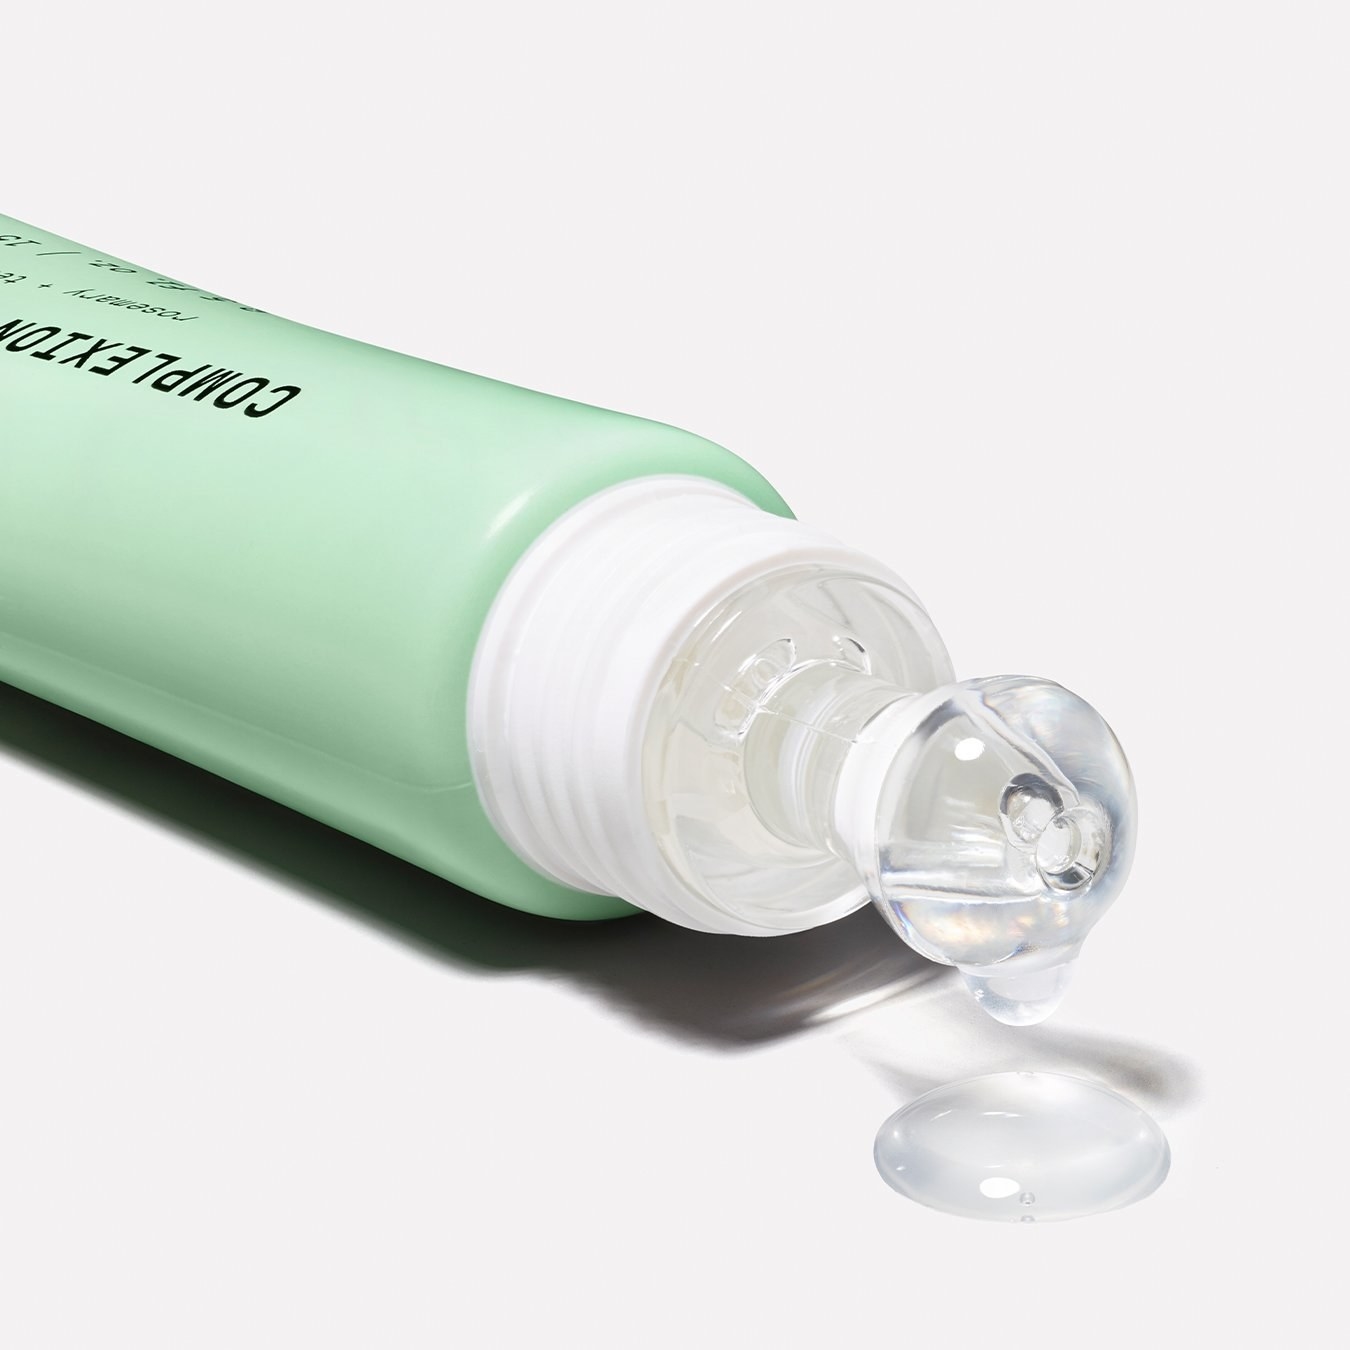 the acne spot treatment in a light green tube